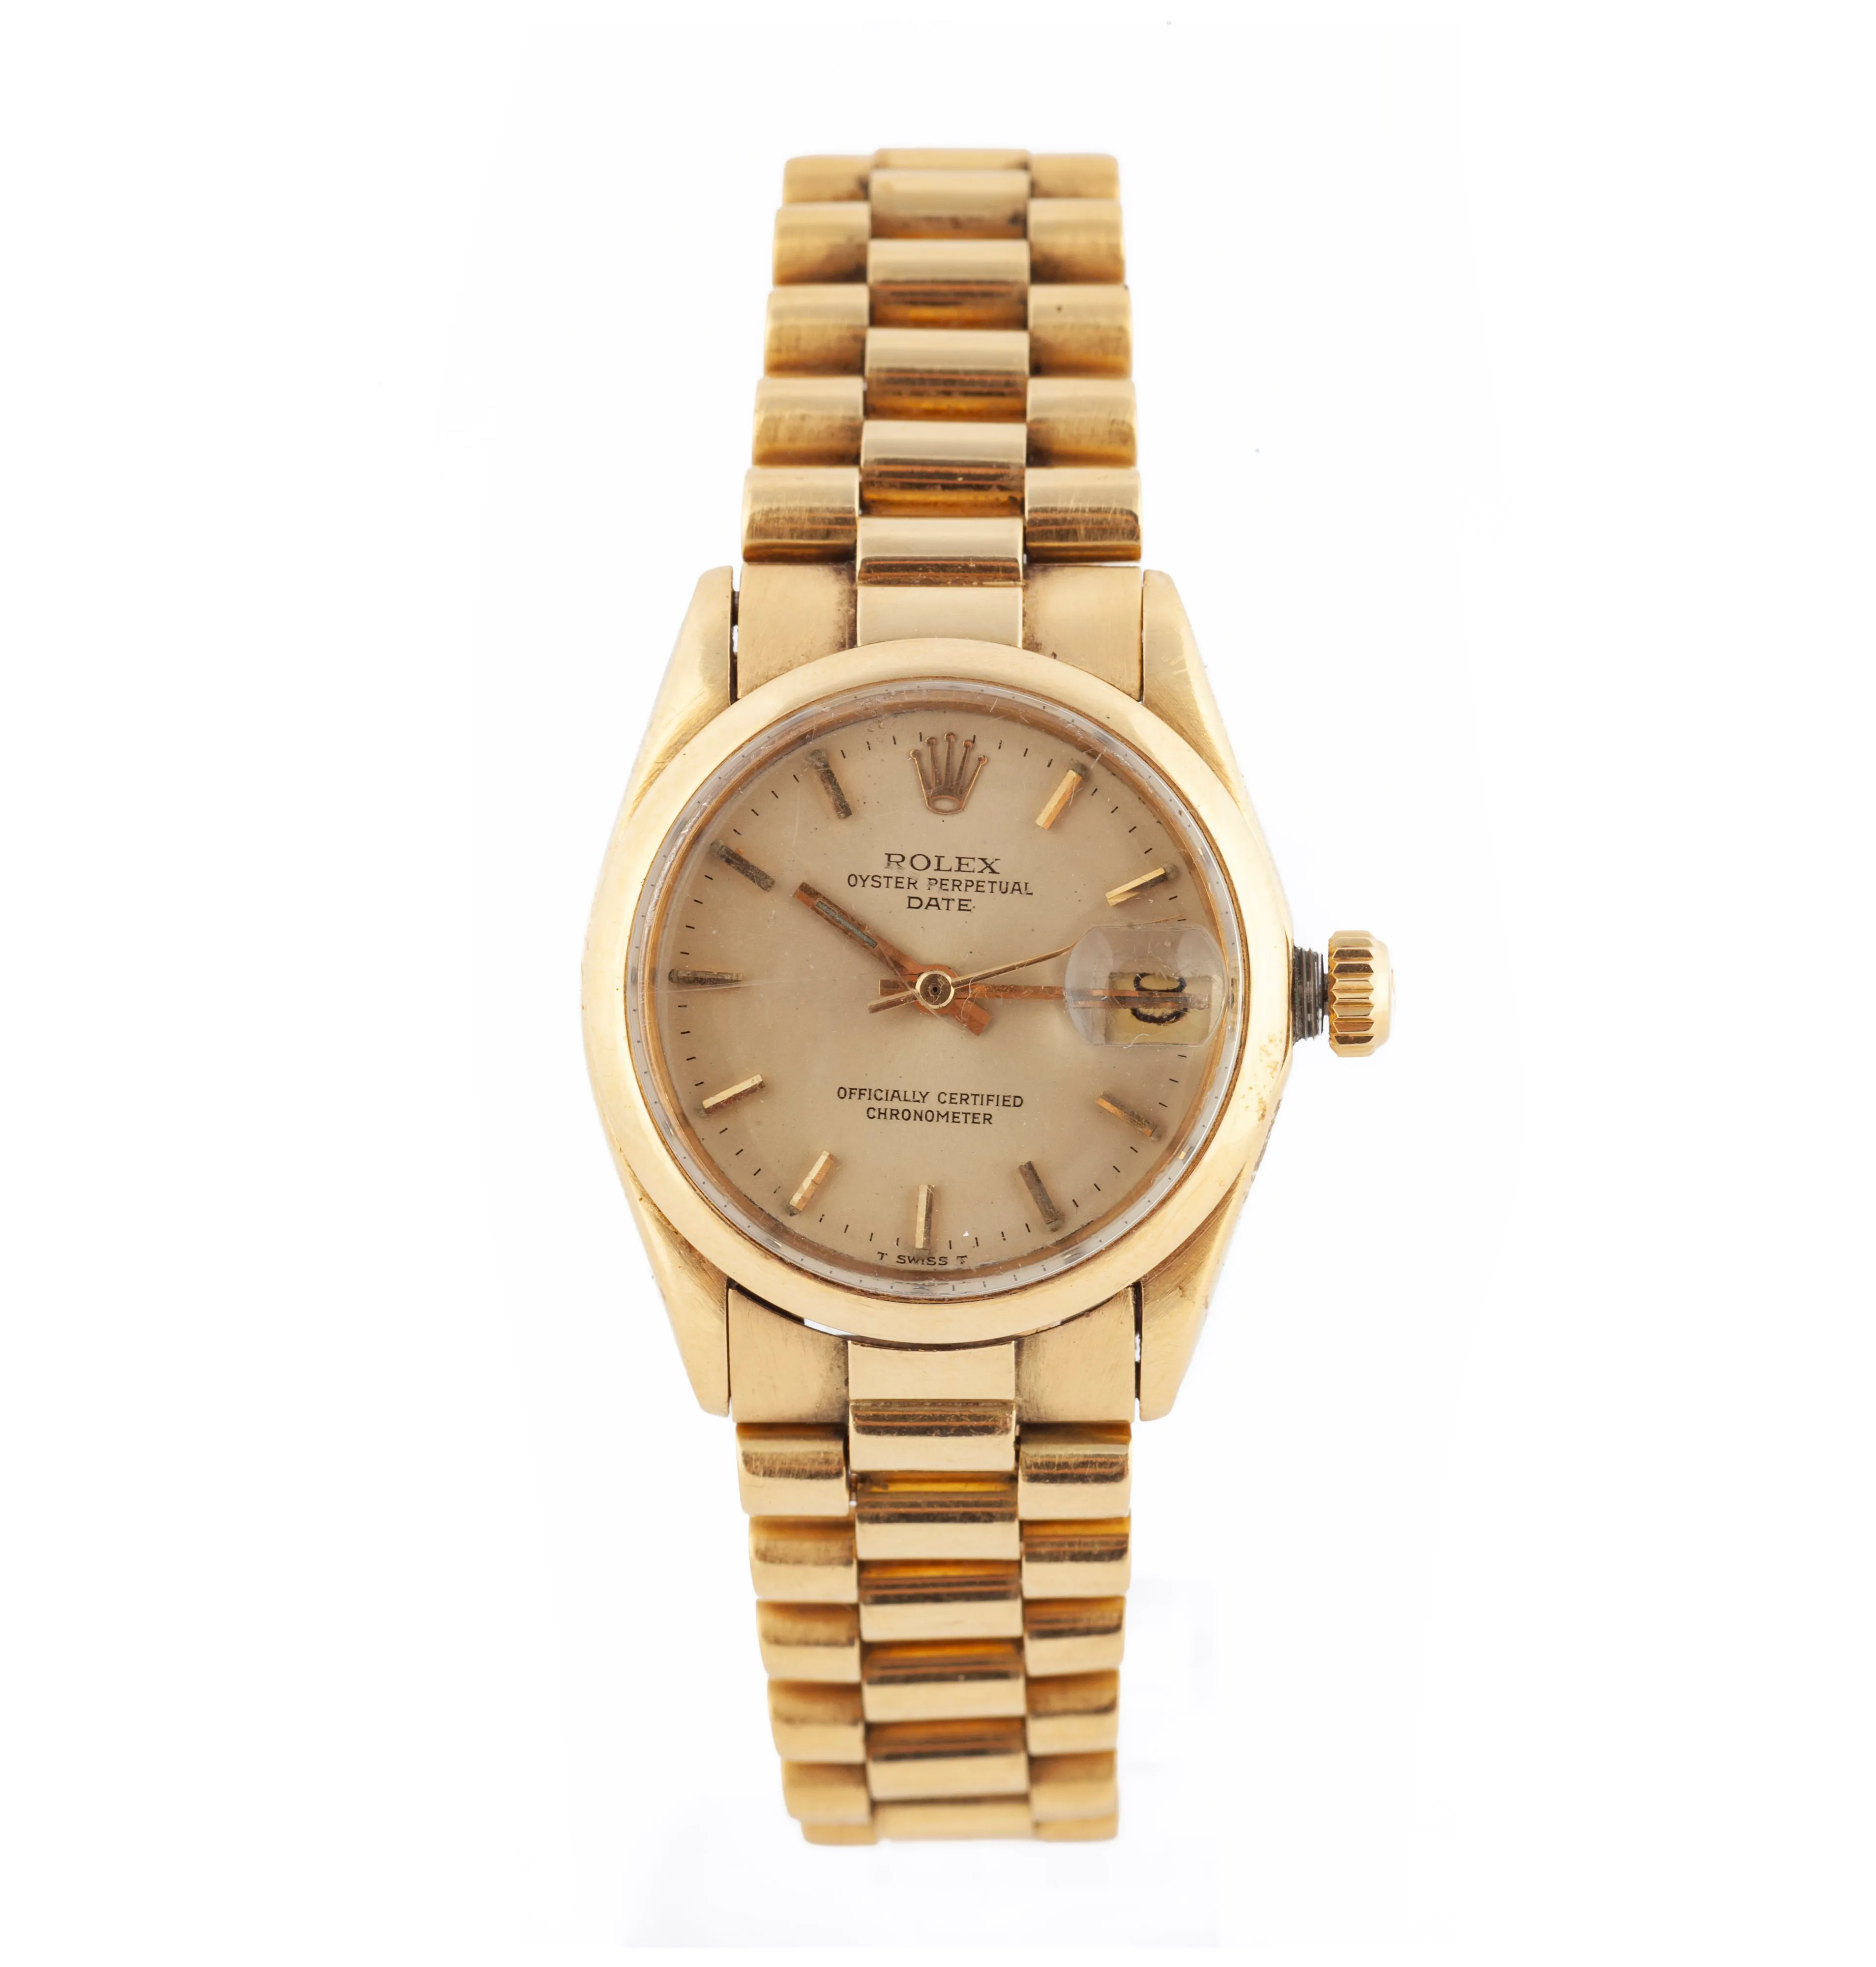 Rolex Oyster Perpetual Date 6624 nullmm